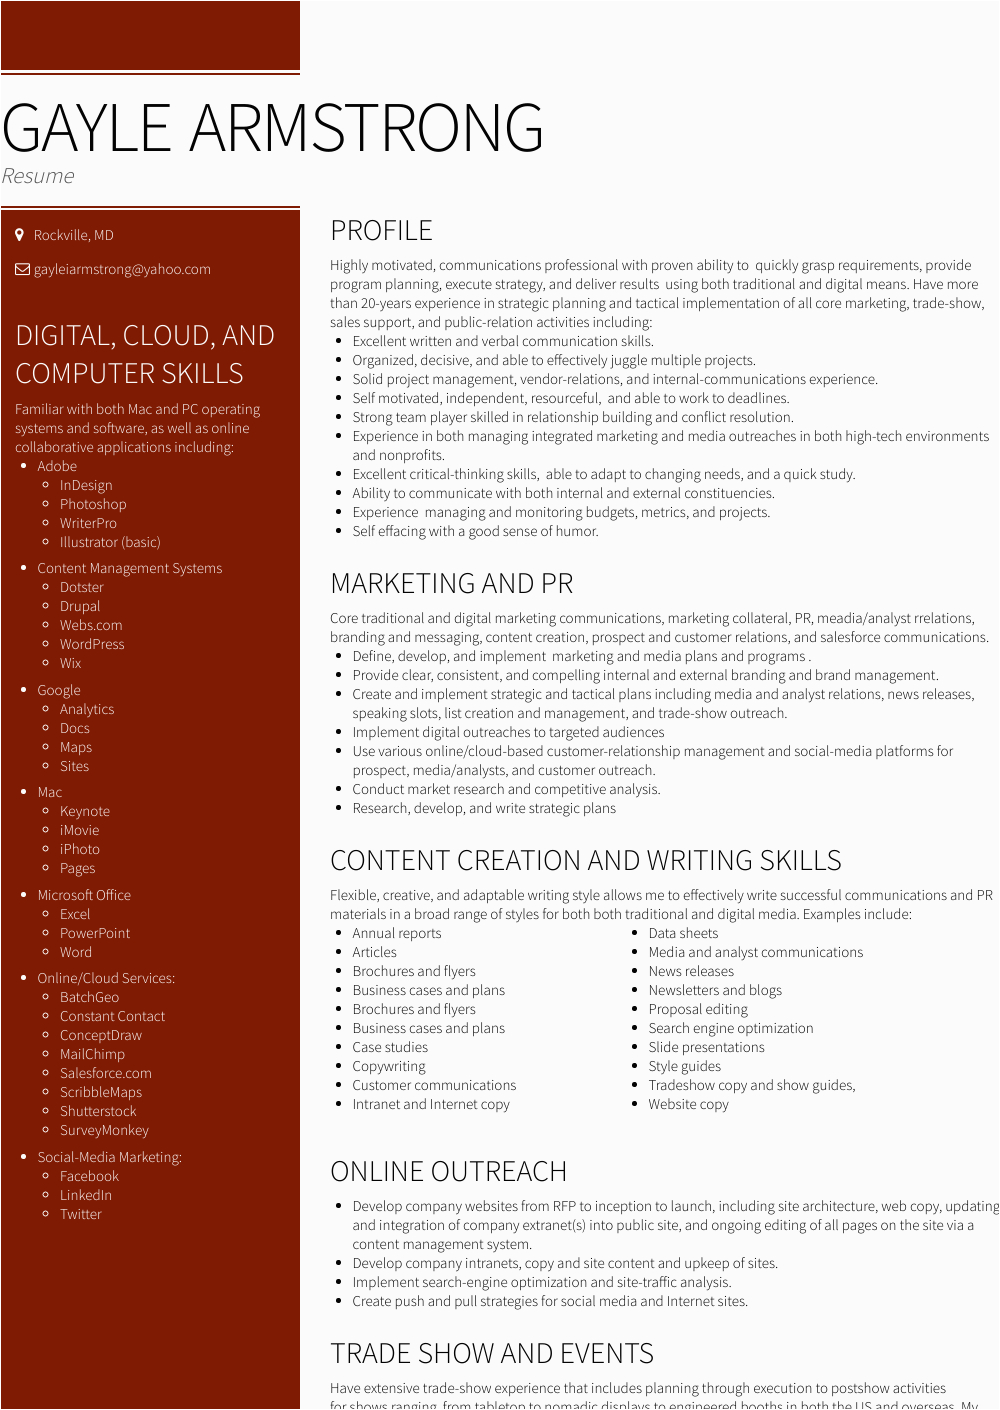 Resume Samples for Self Employed Contractors Contractor Resume Samples and Templates